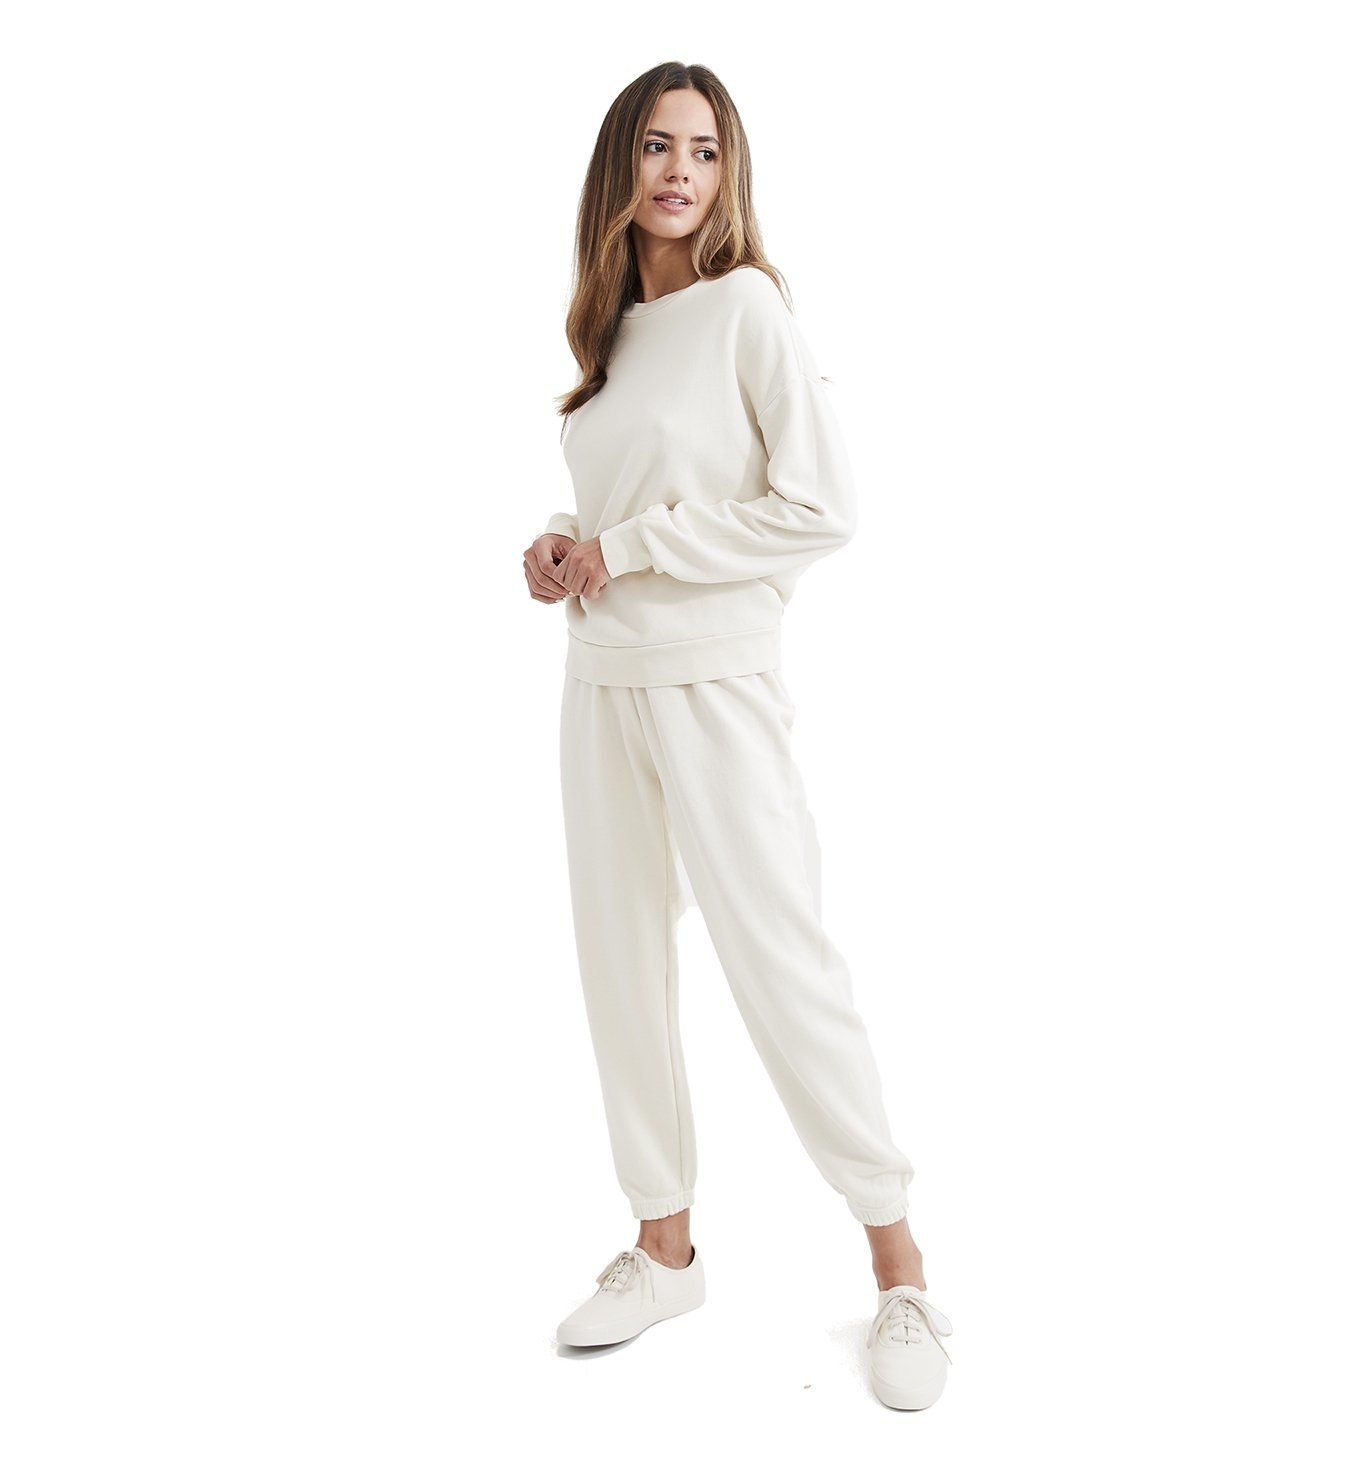 Model is wearing a cream colored sweatshirt and sweat pant set